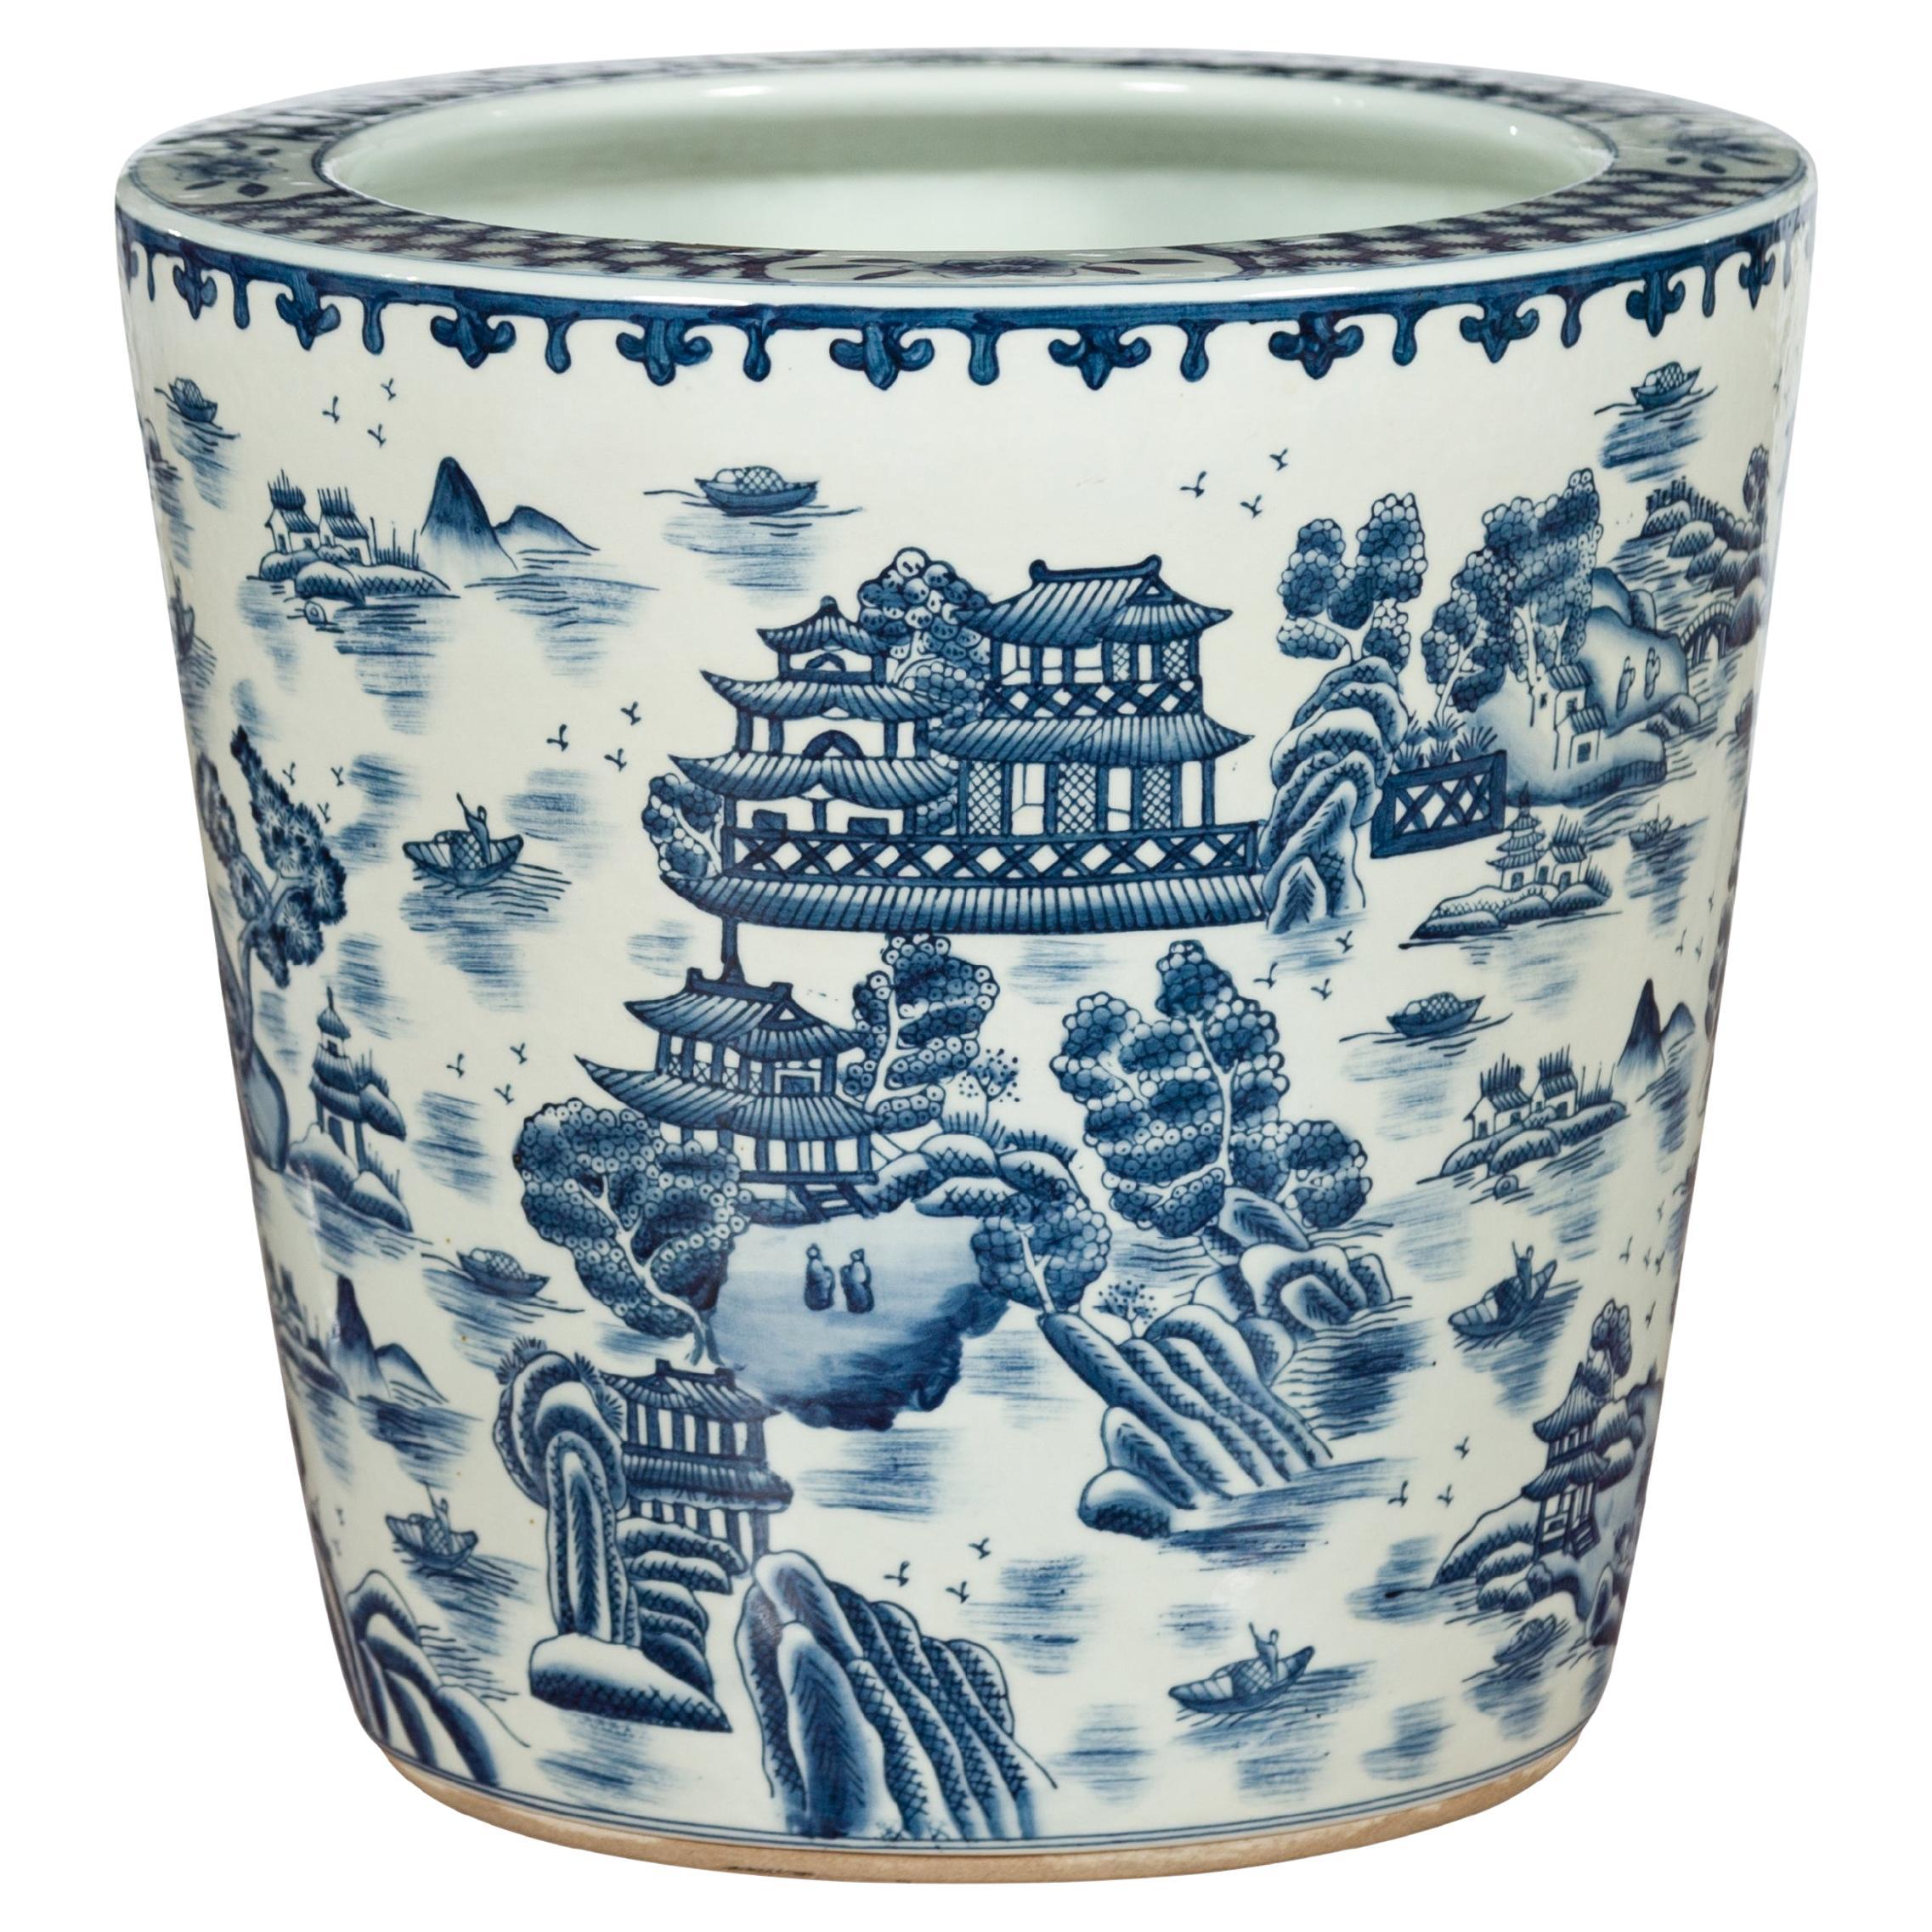 What is blue and white porcelain called?